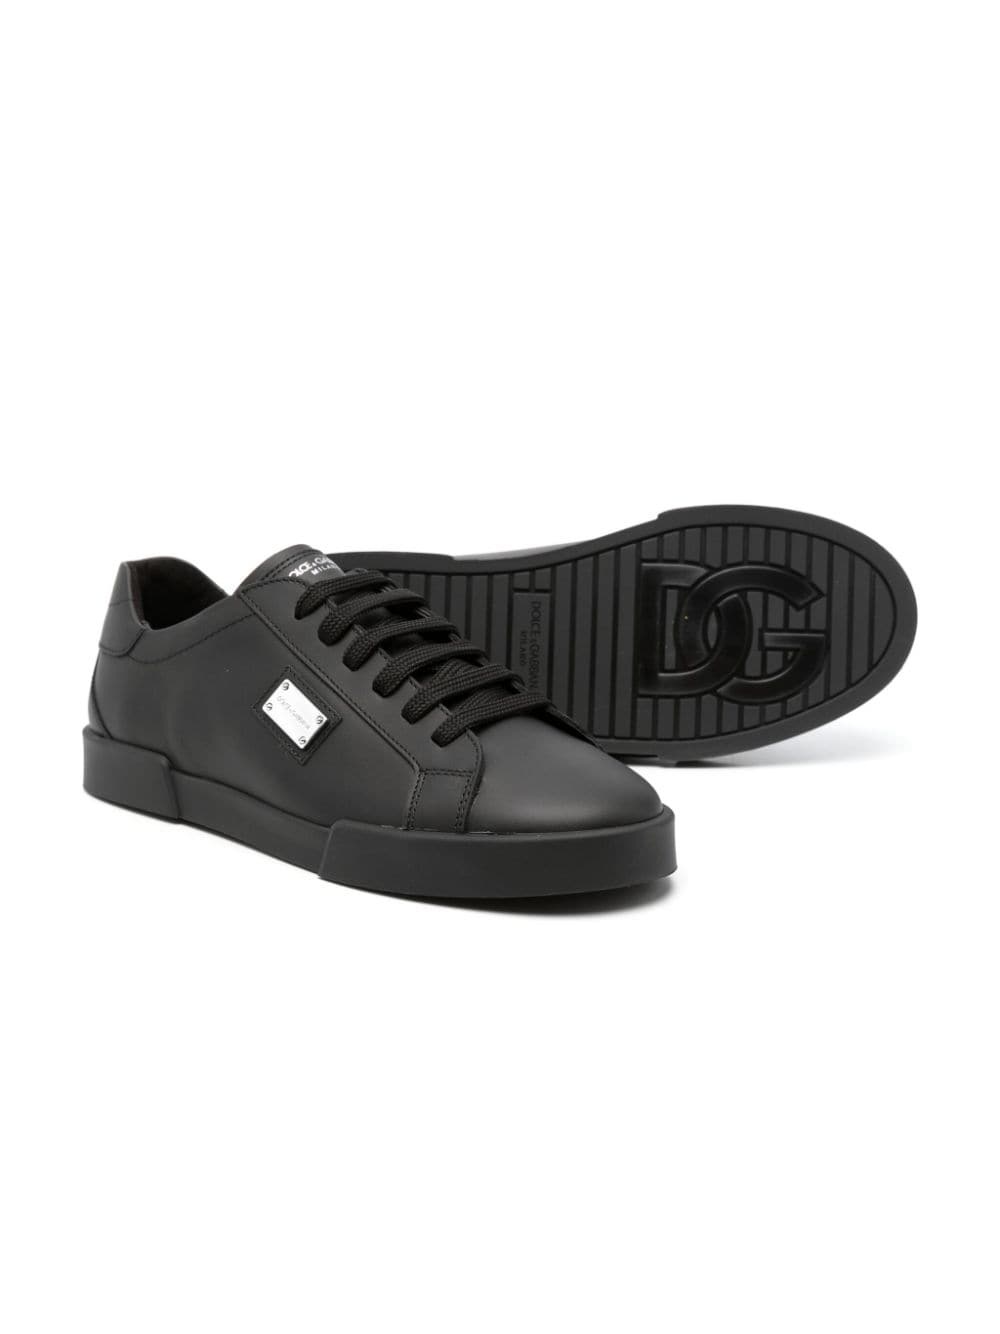 Black leather children's sneakers